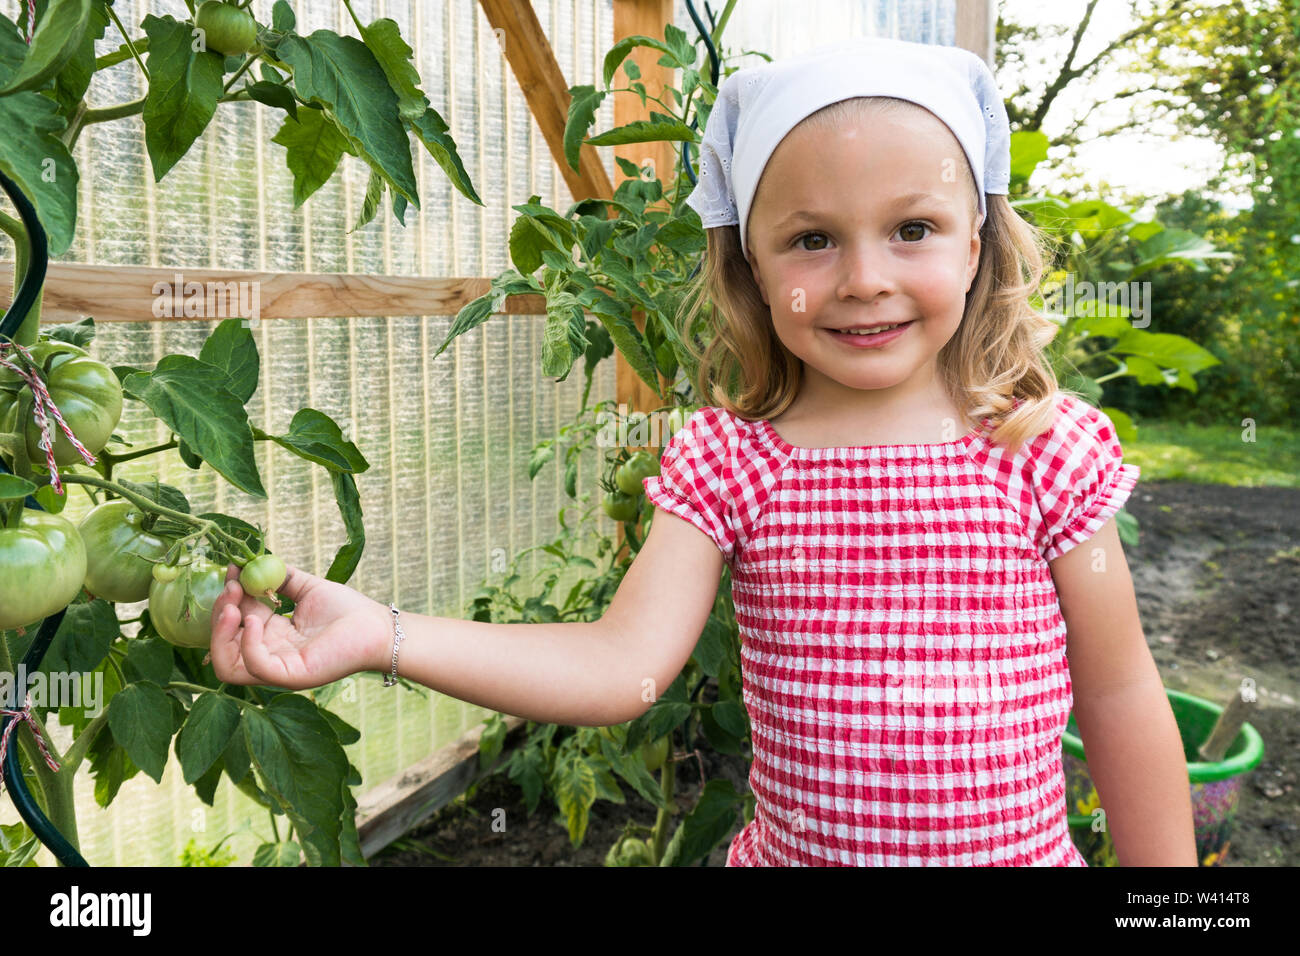 young pre-school girl shows and checks the organic tomatoes growing in her vegetable patch Stock Photo